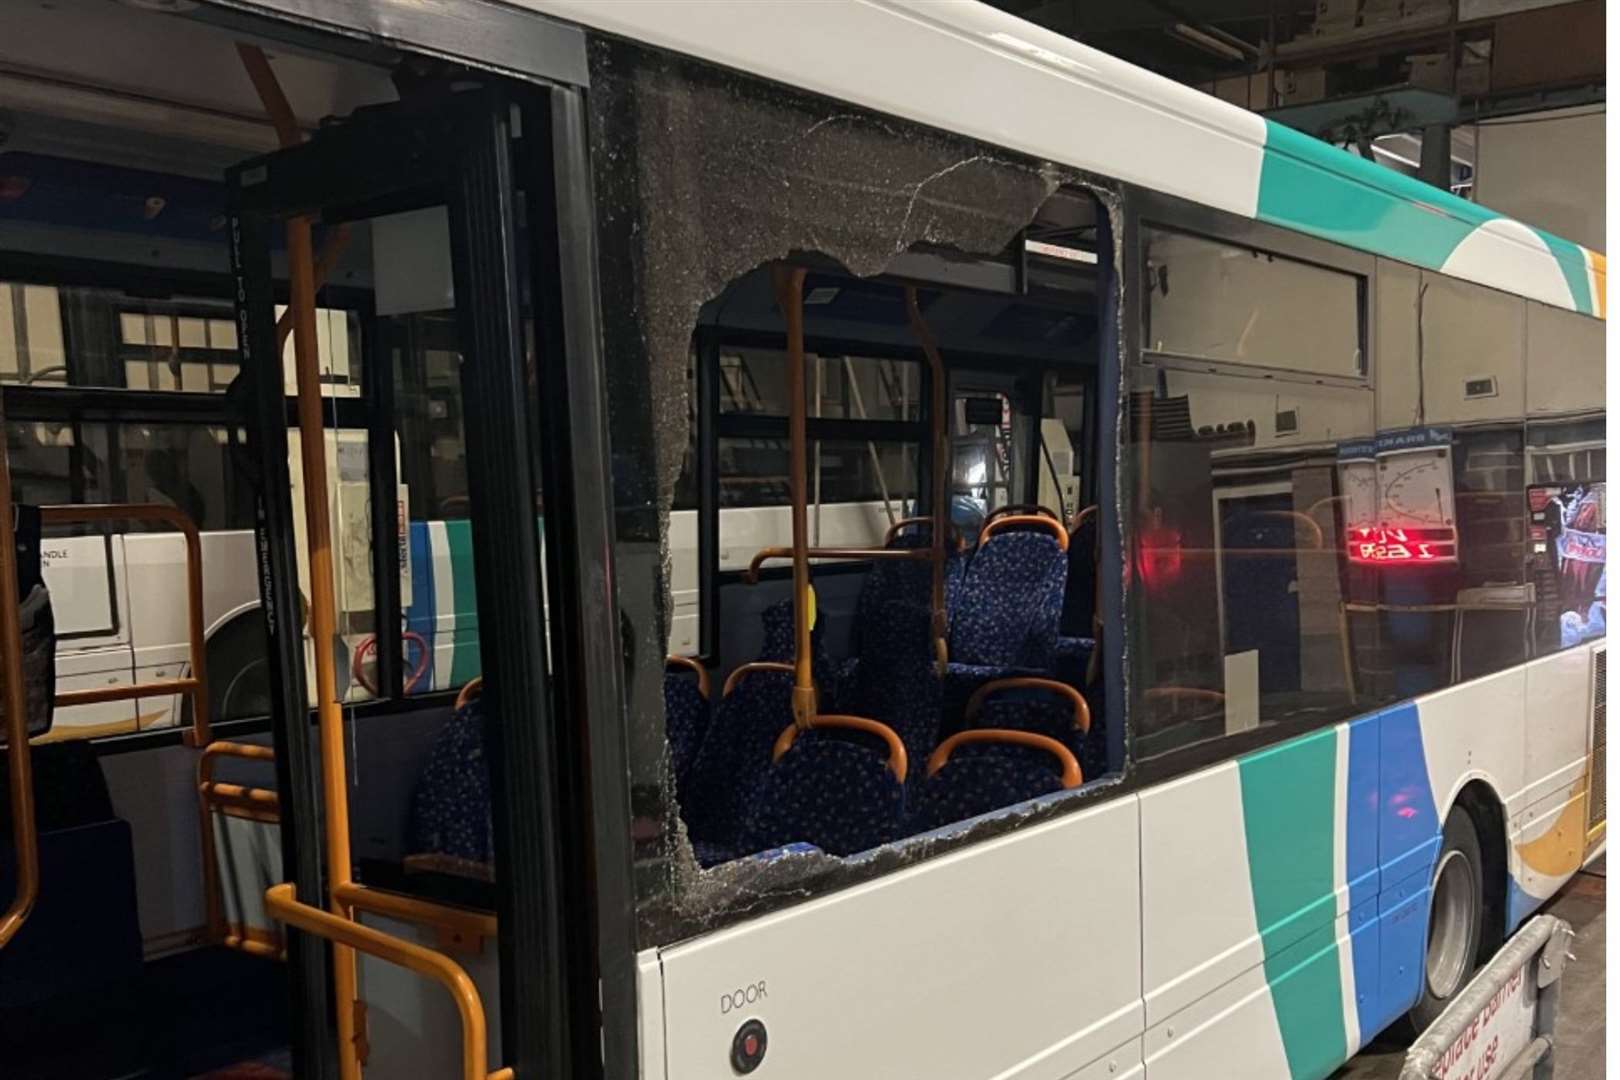 The damage done to one Stagecoach bus in the Trinity Road are of Ashford. Photo: Stagecoach